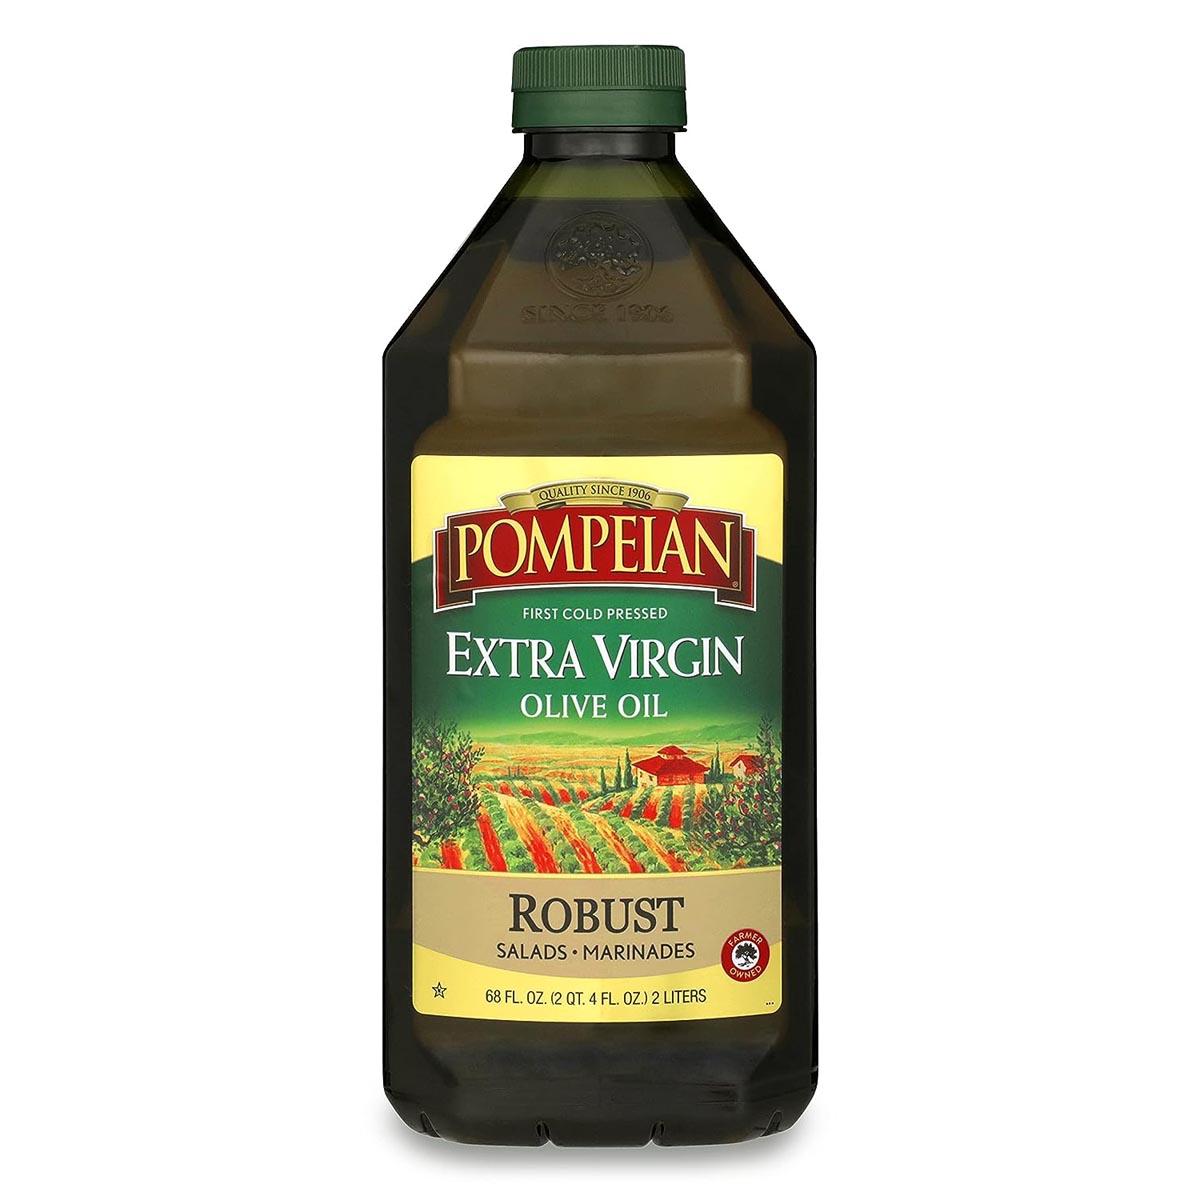 Pompeian Robust First Cold Pressed Extra Virgin Olive Oil 68fl oz for $16.13 Shipped